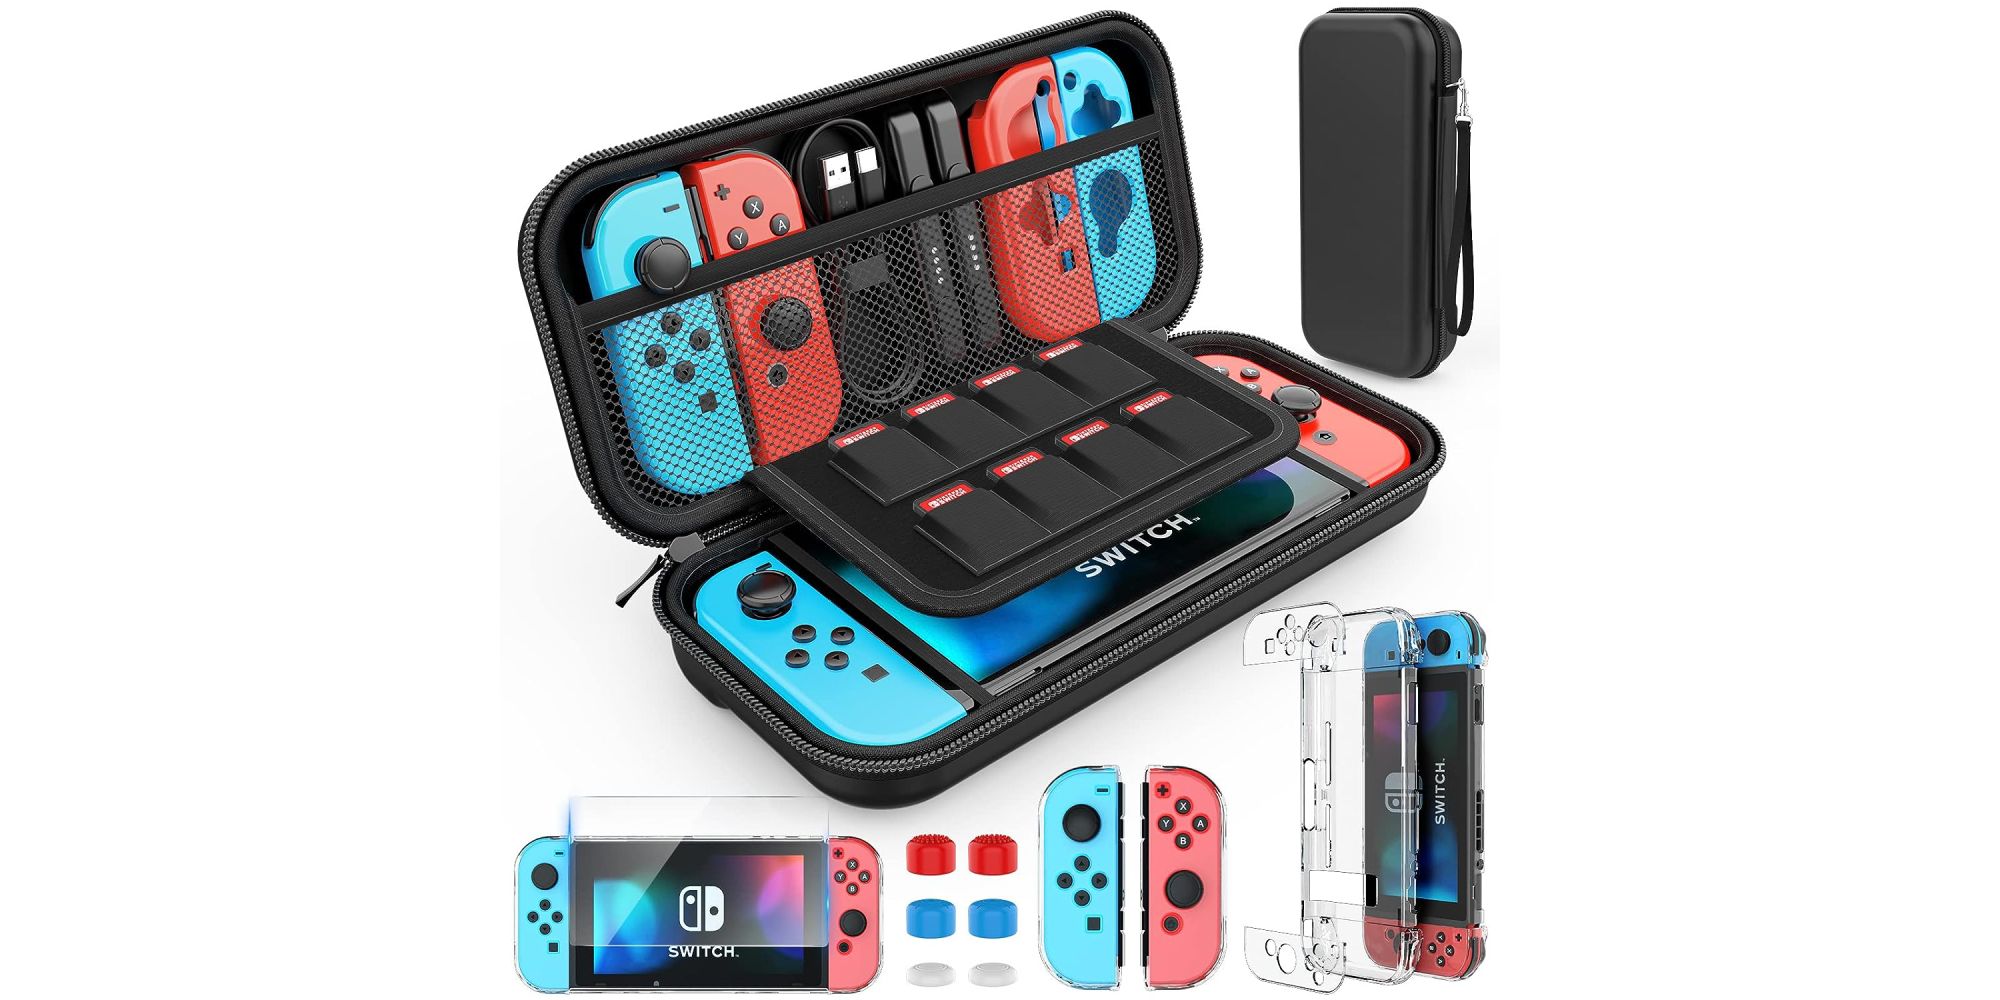 HEYSTOP Switch Case already loaded with a Switch, Joy-Cons, and games (not included) along with thumb grips, screen and Switch protectors, and more